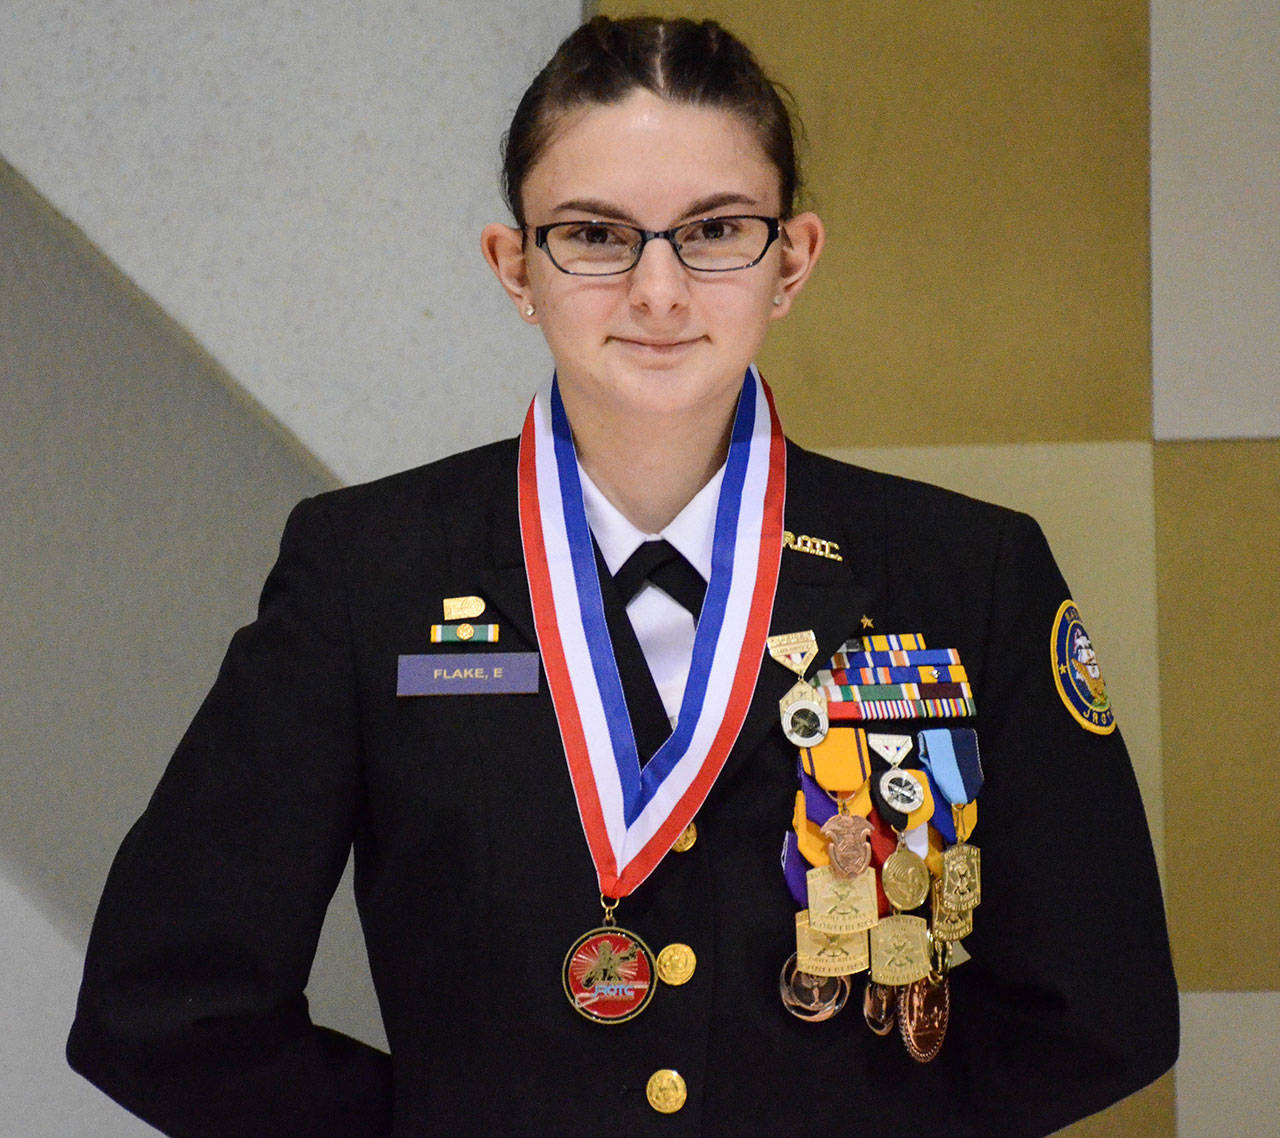 Elena Flake displays her medal from the national competition. (Photo by Civil Marksmanship Program)